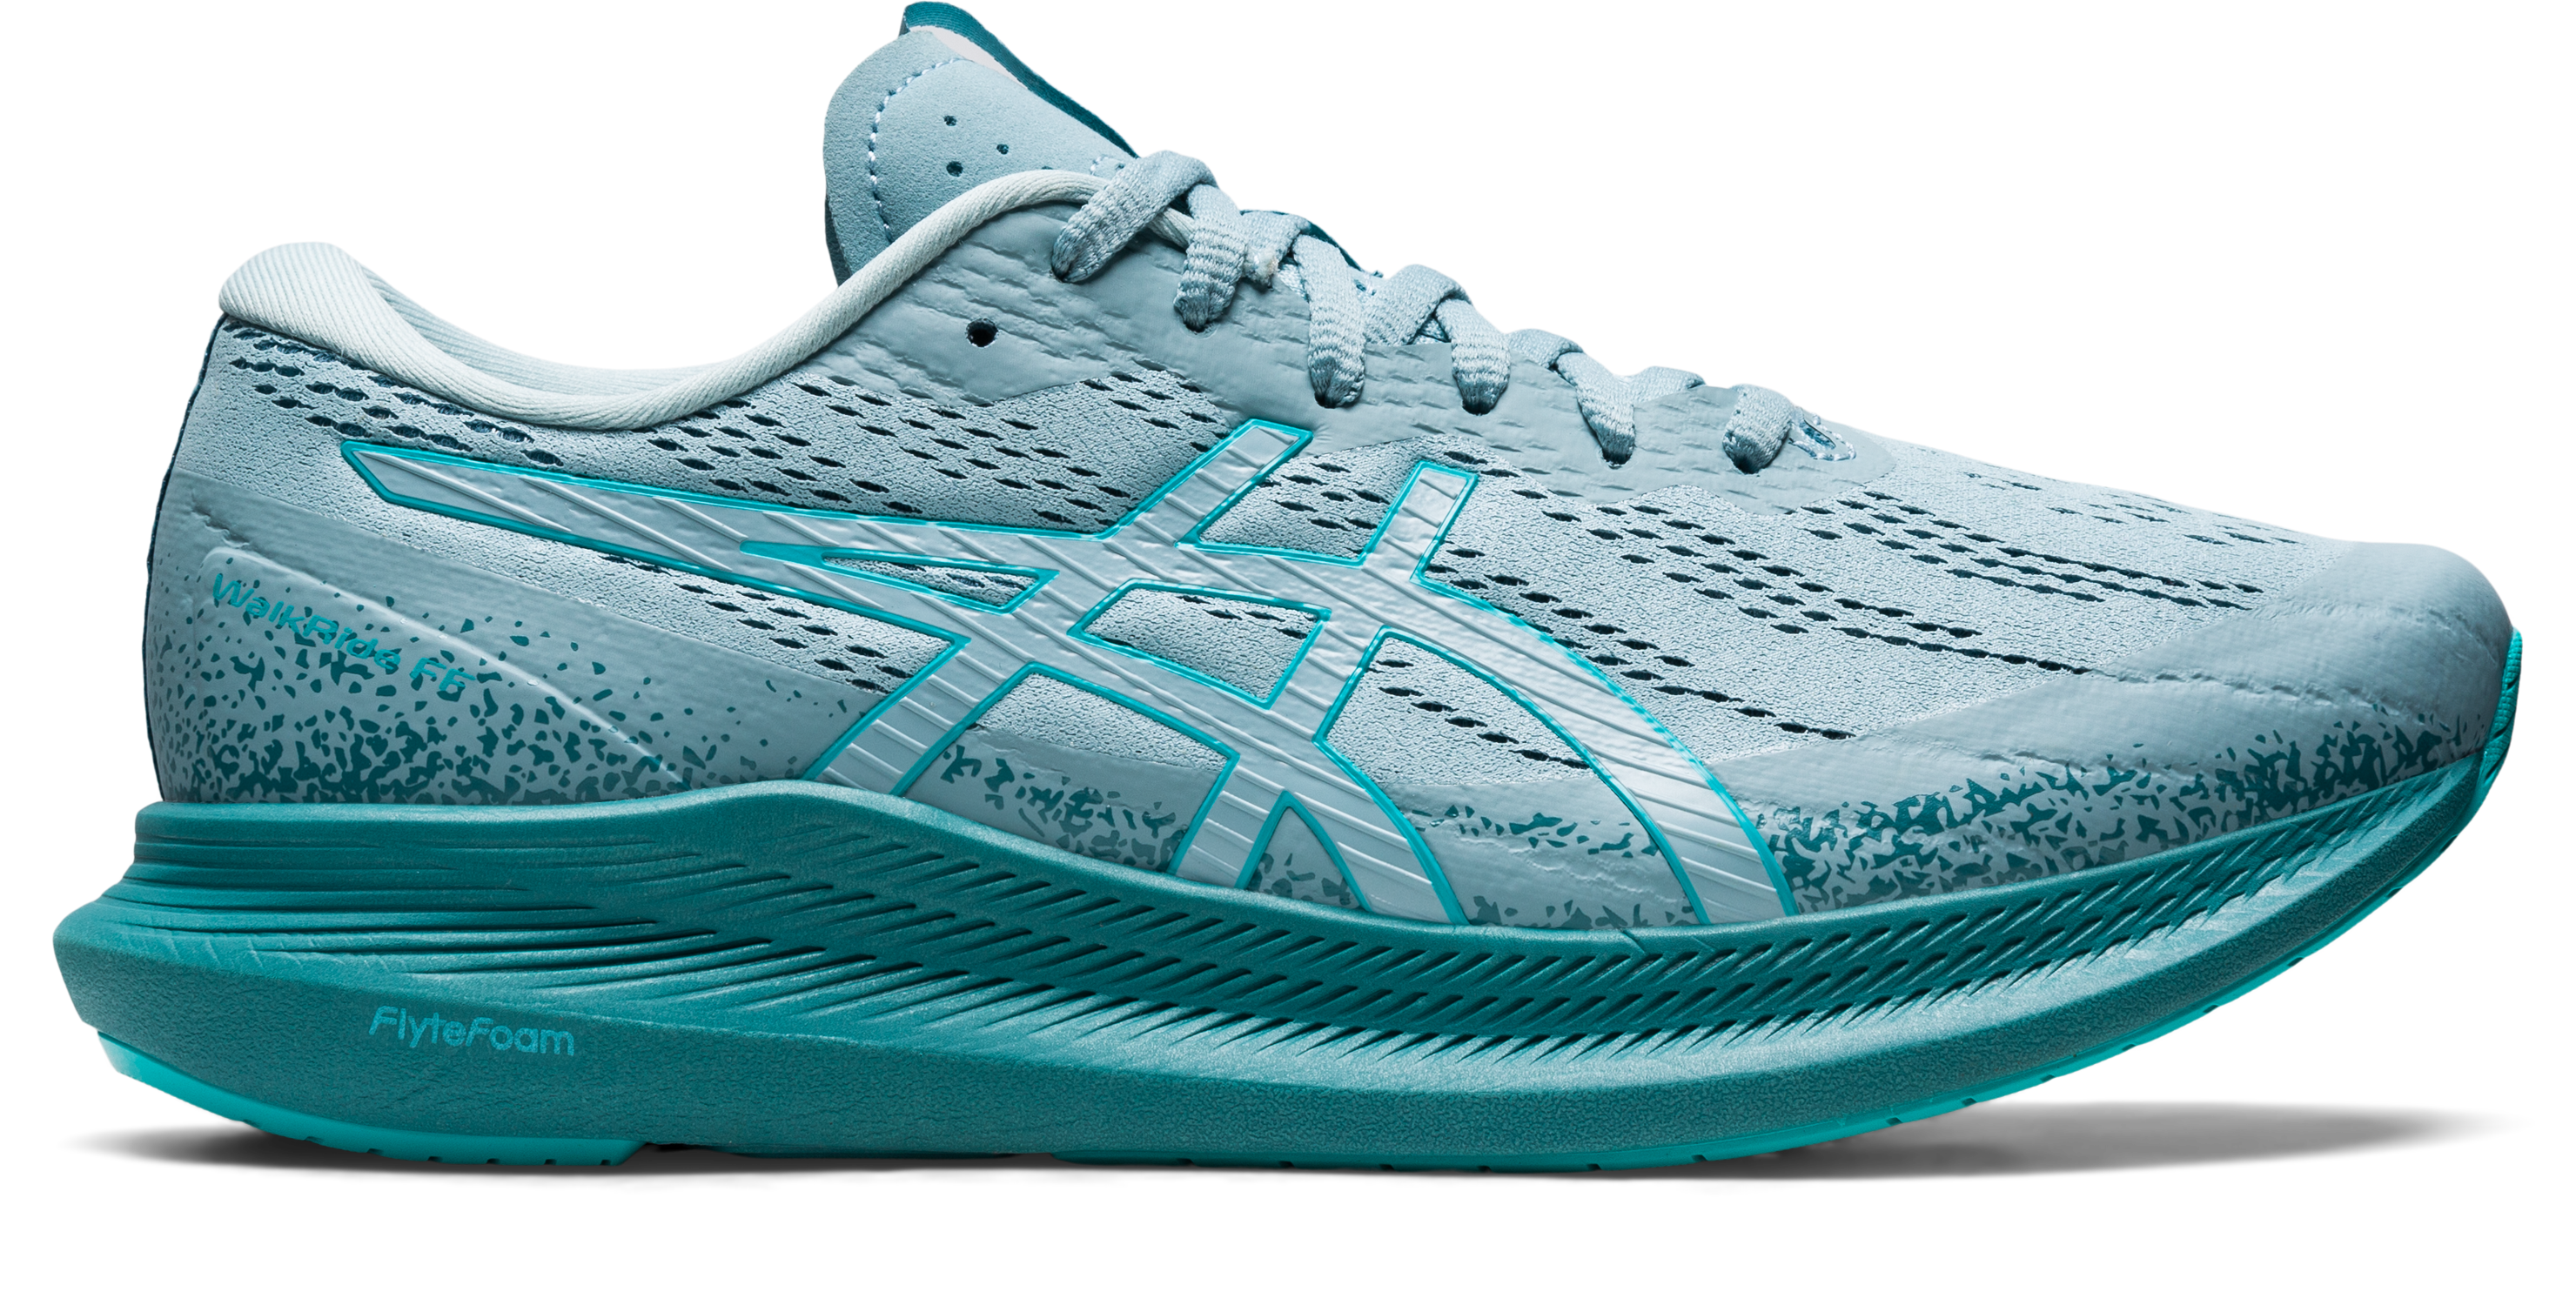 A Guide to the Best ASICS Shoes for Walking | ASICS NZ